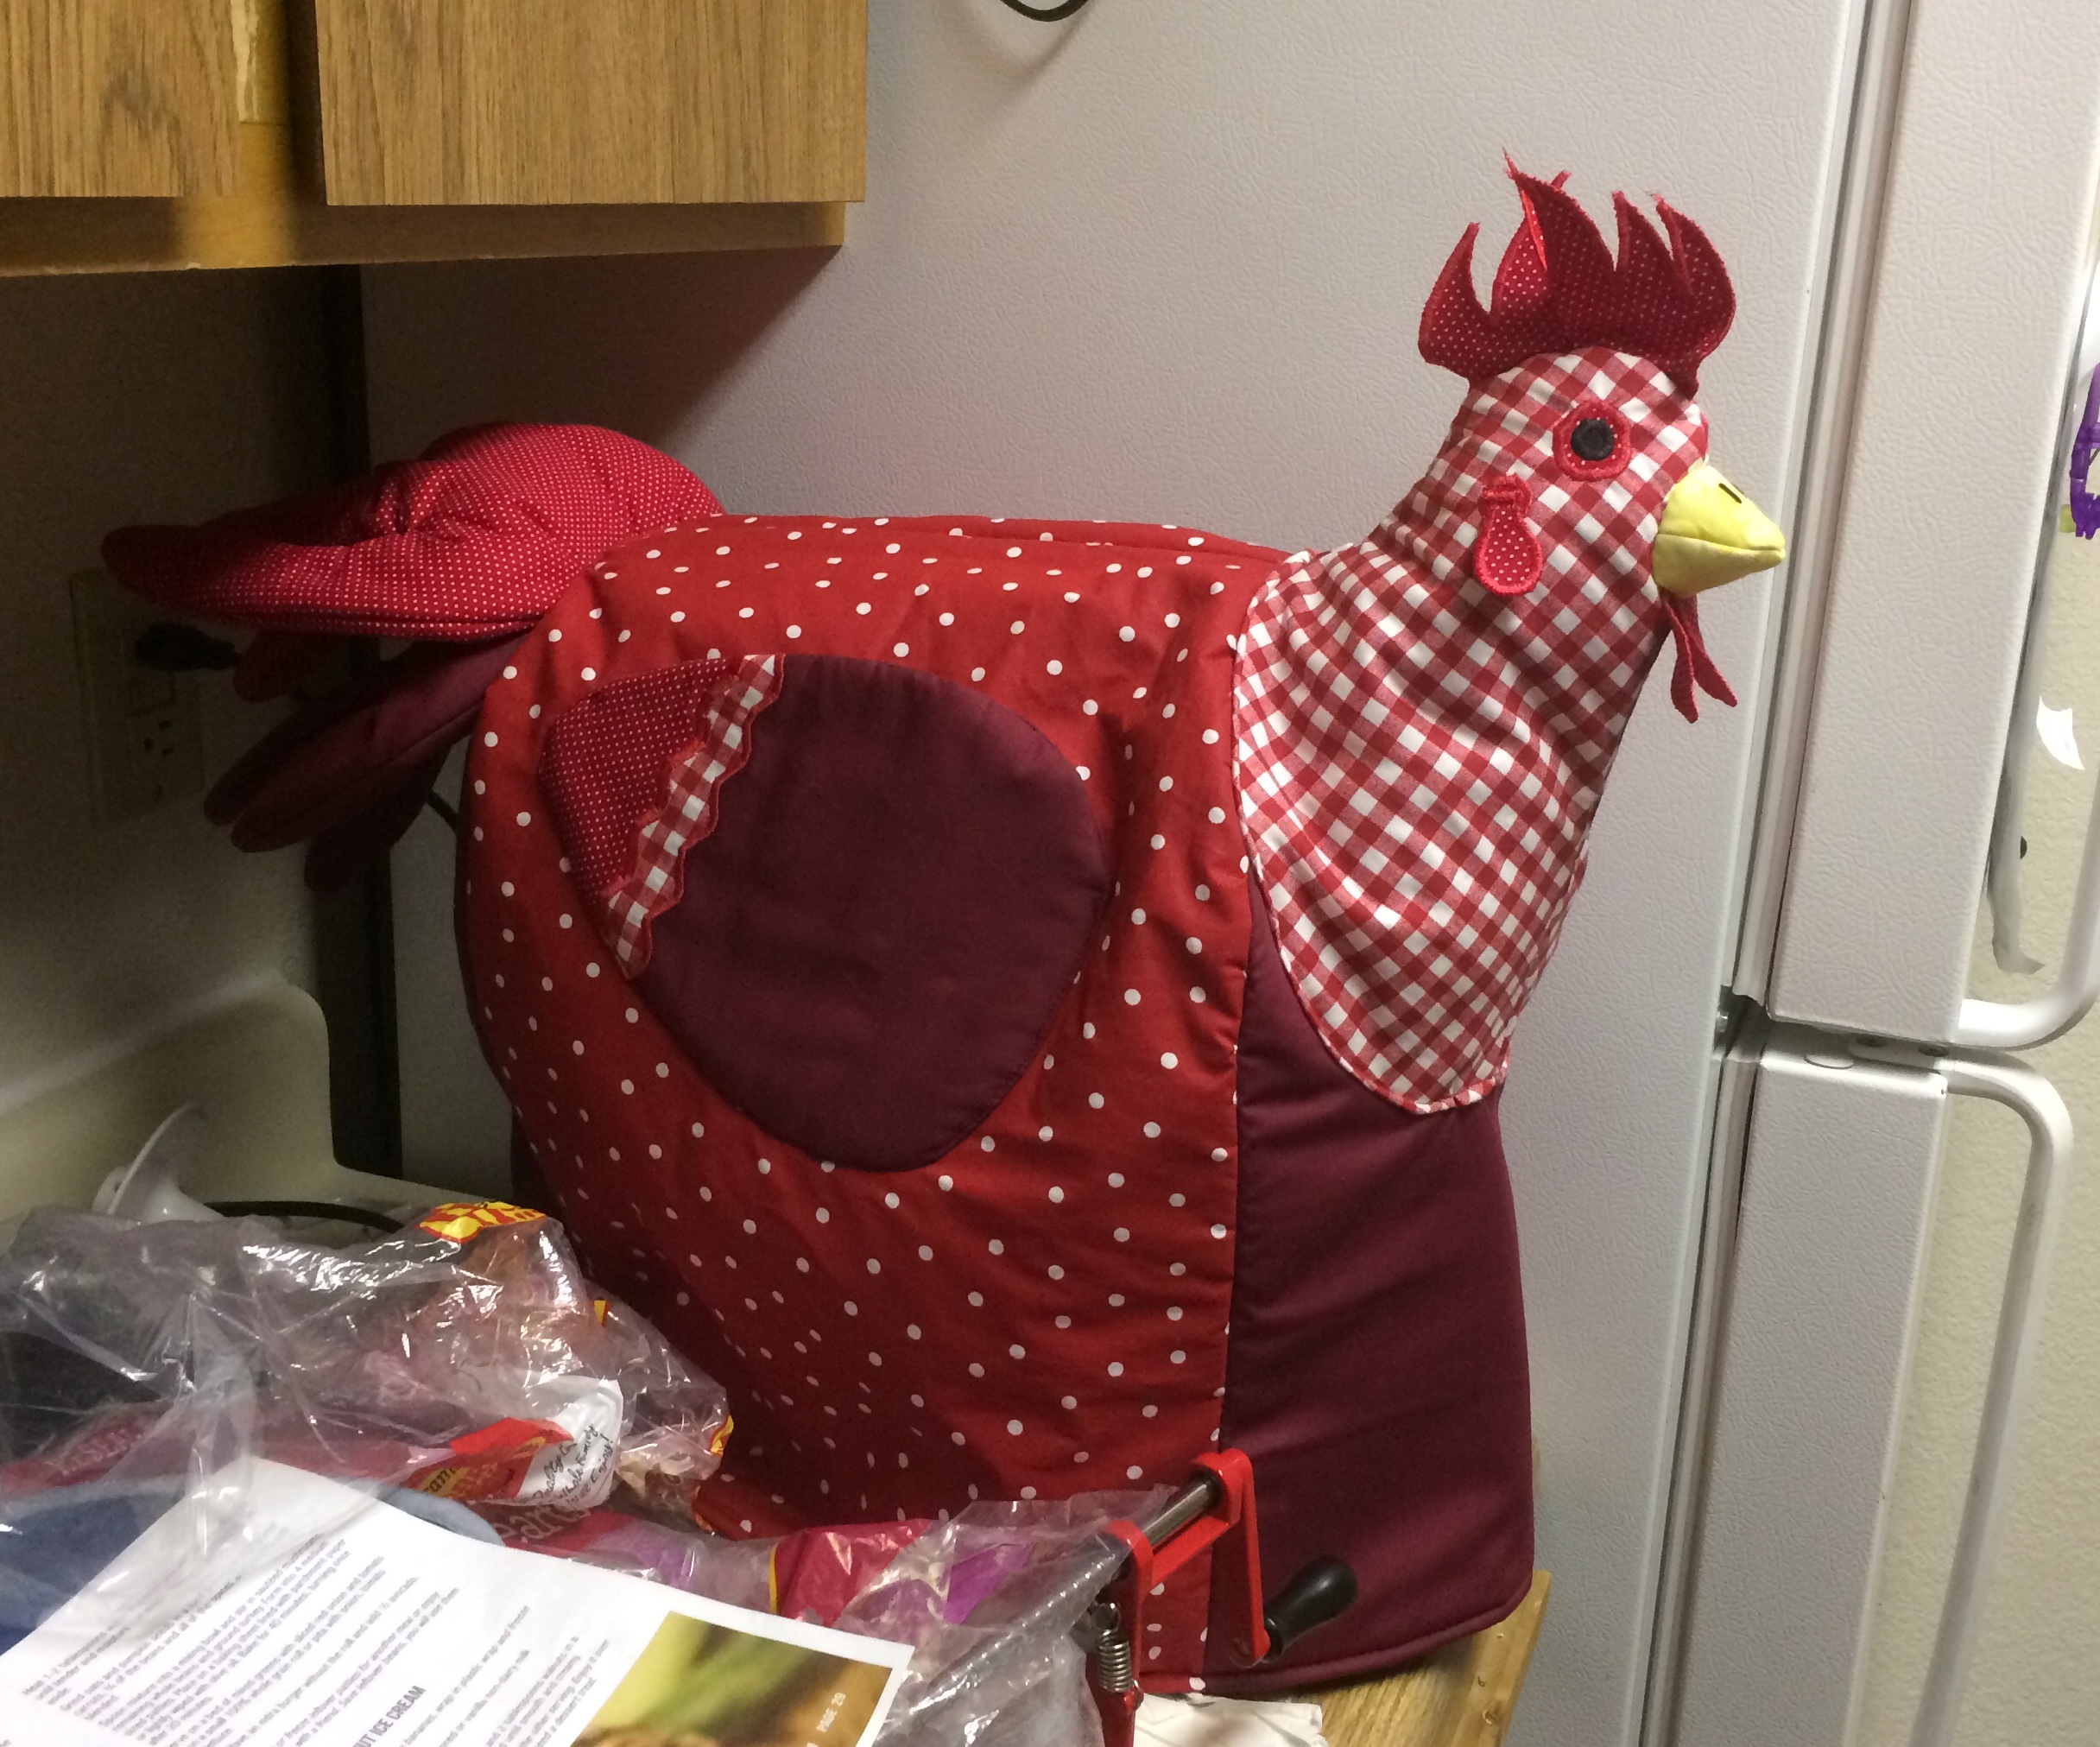 Roosters 2 Slice Toaster Cover Rooster Toaster Cover 2 Slice with Zipper Cotton Non Quilted Fabric Handmade in Ohio